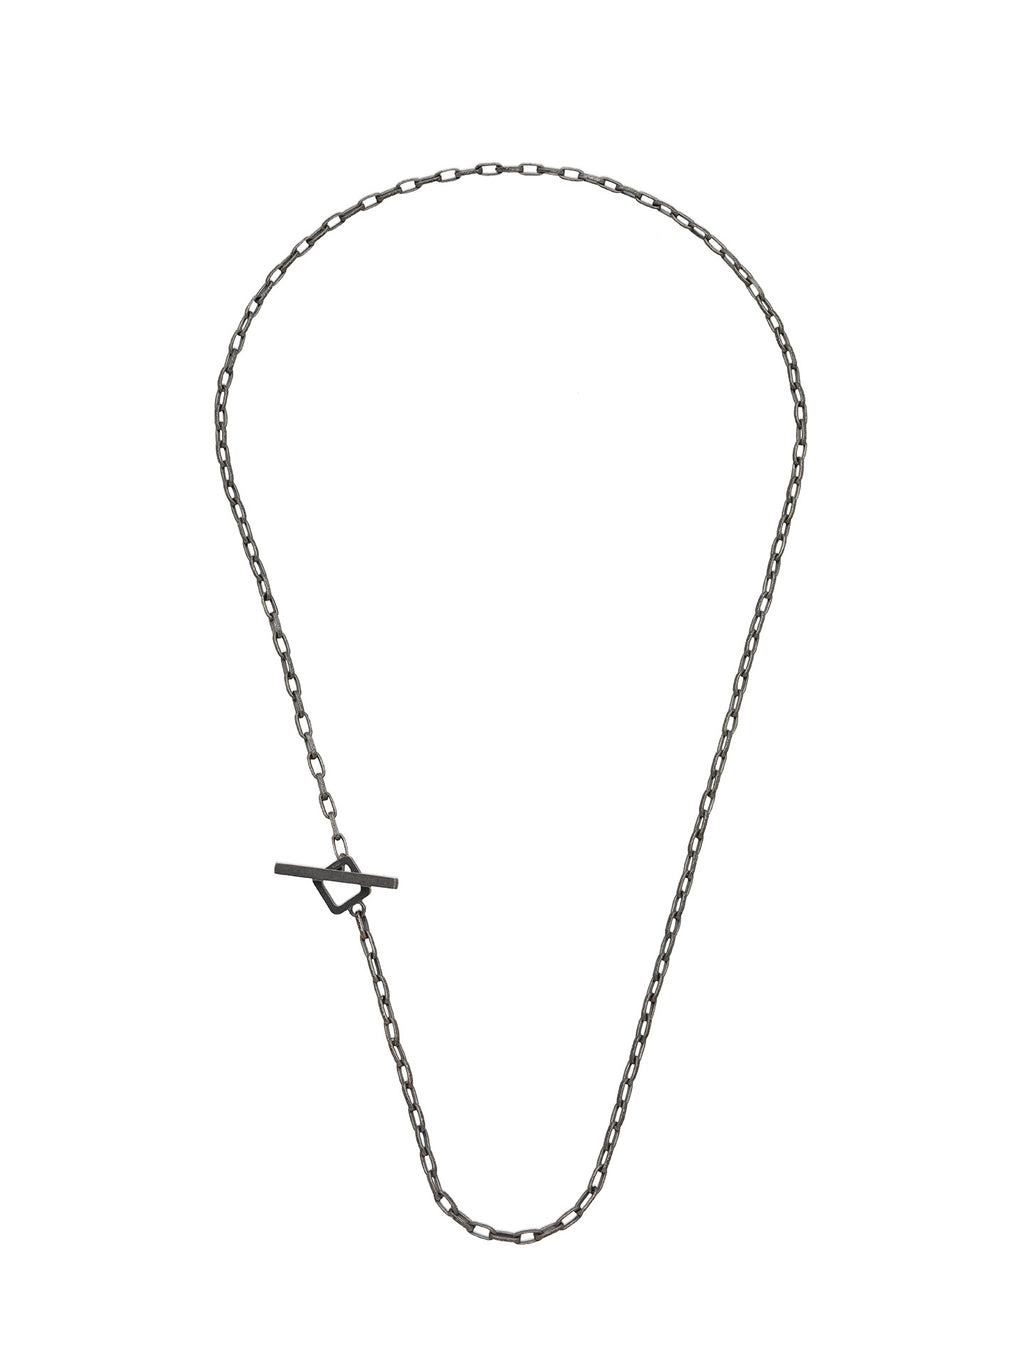 Ulysses Link Necklace with Toggle Clasp MARCO DAL MASO – Ulysses – Necklace